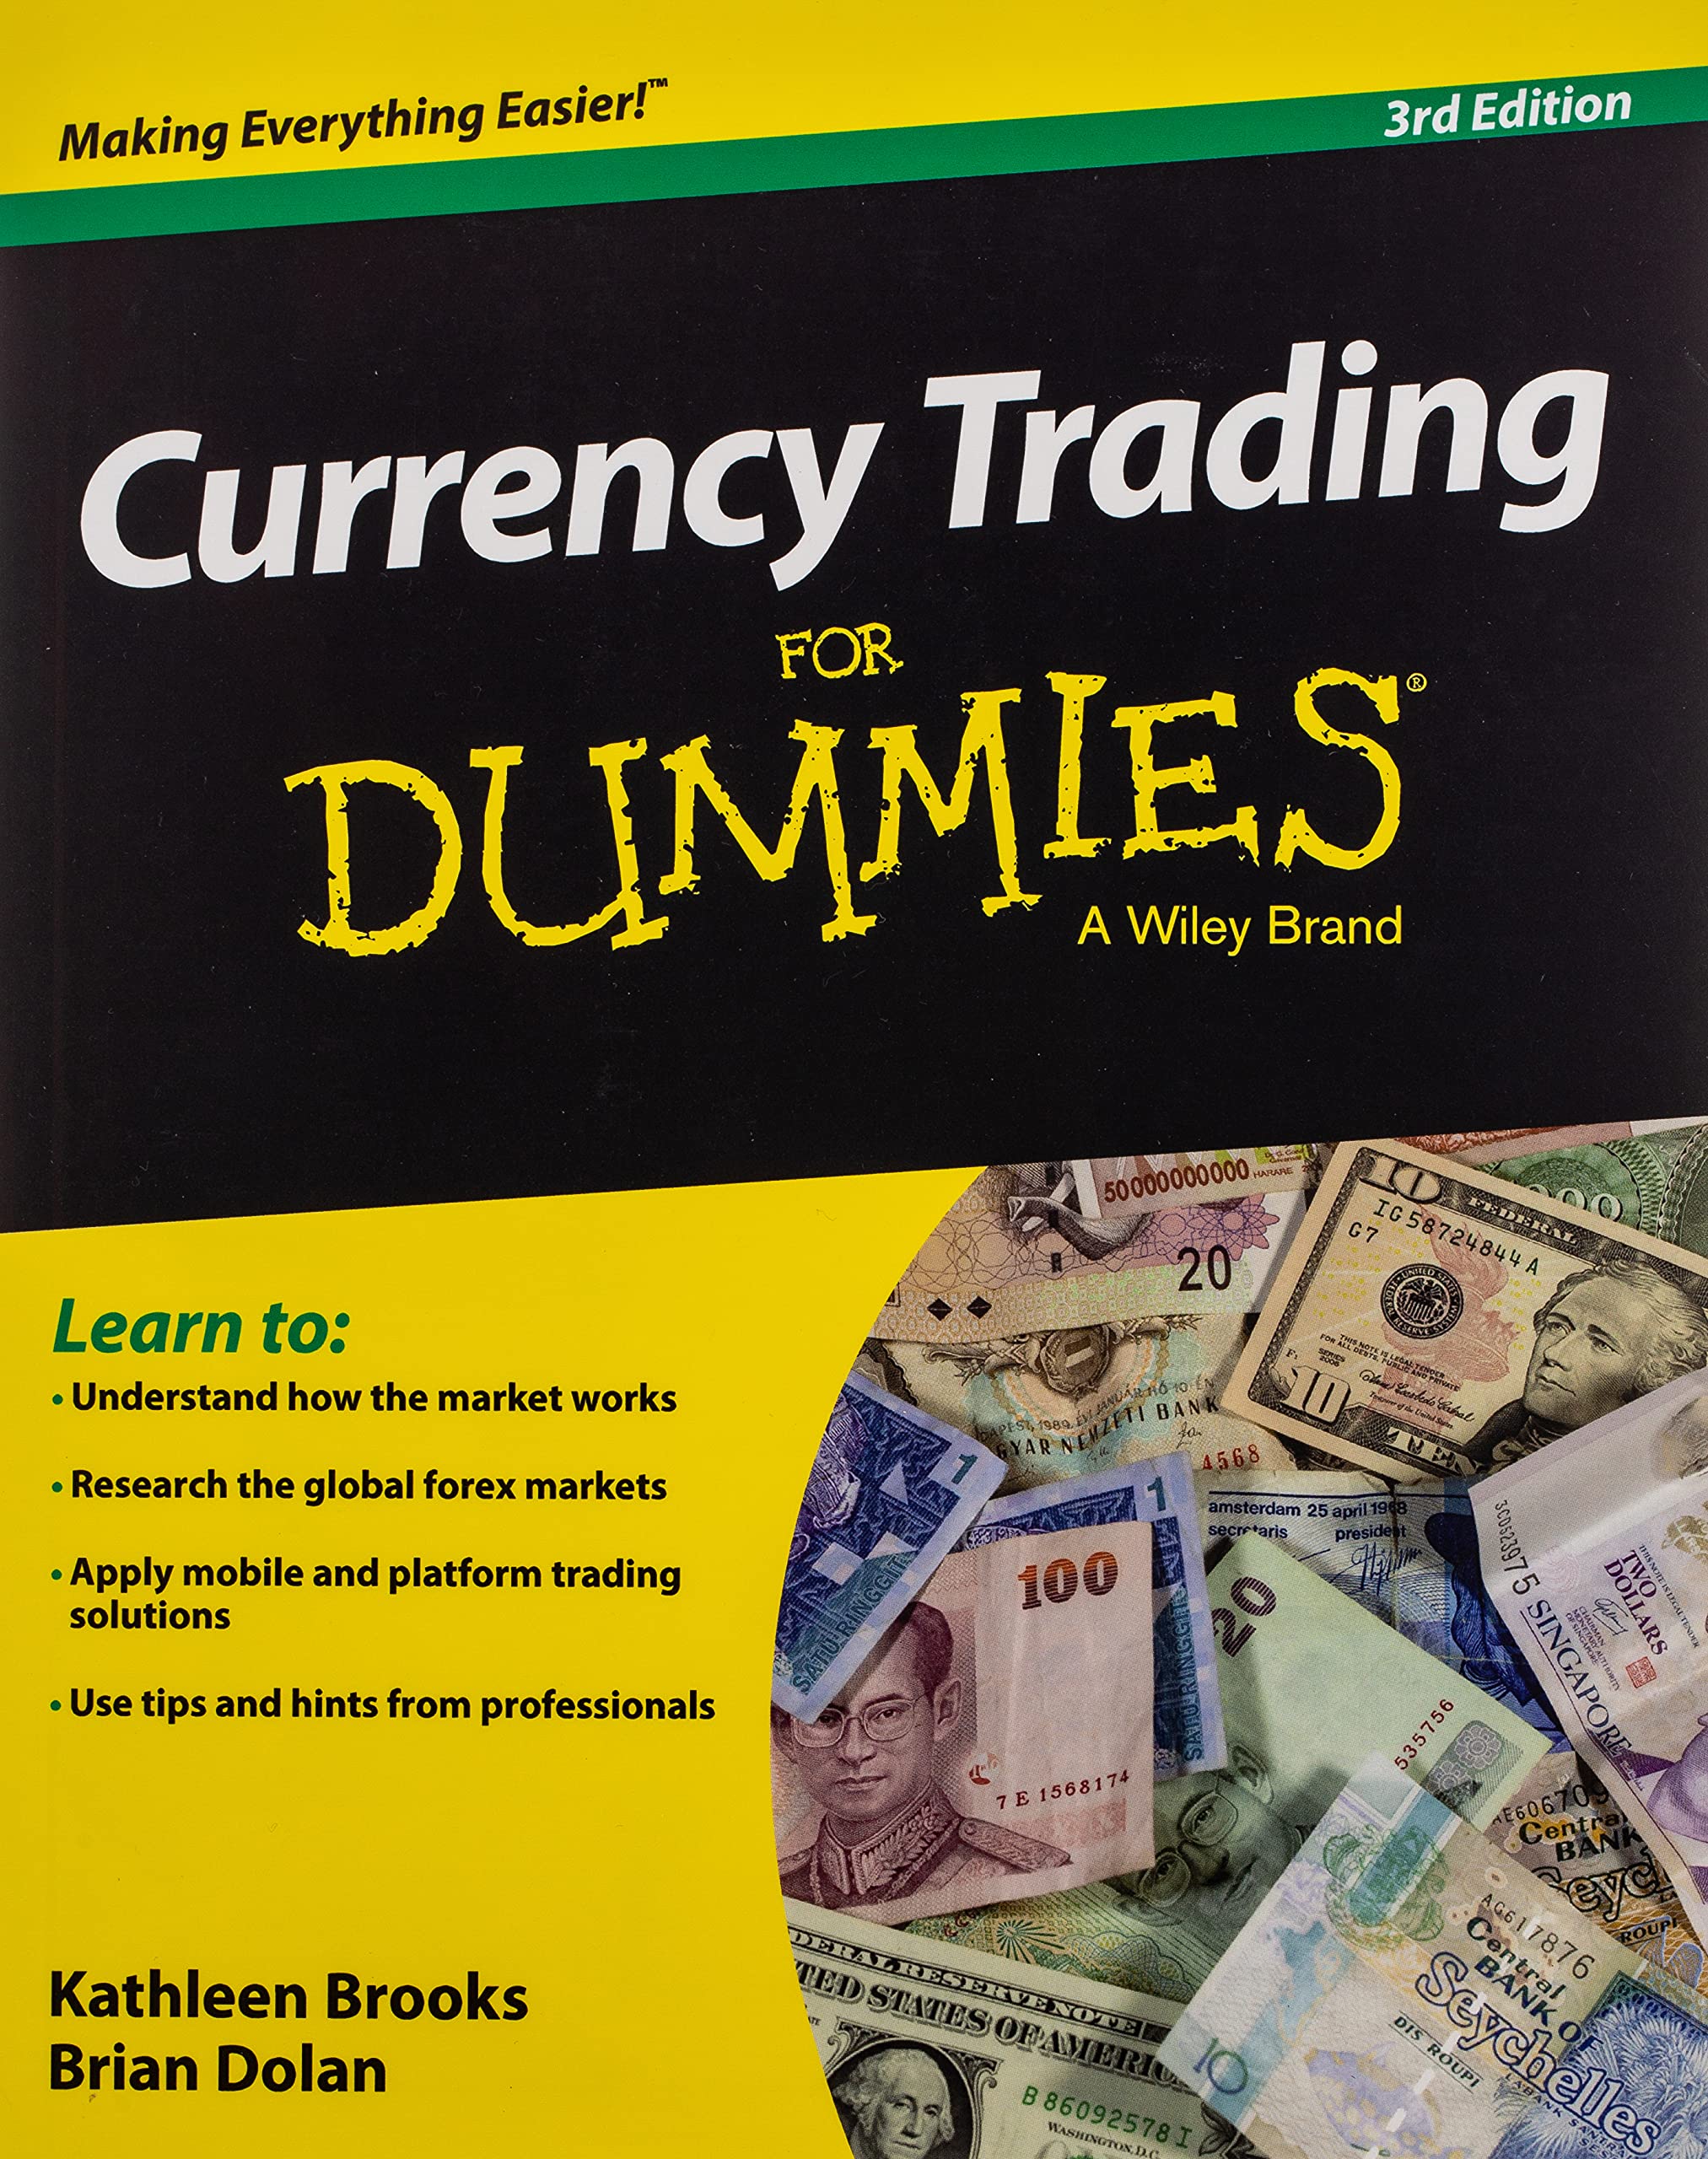 Currency Trading For Dummies - Brian Dolan